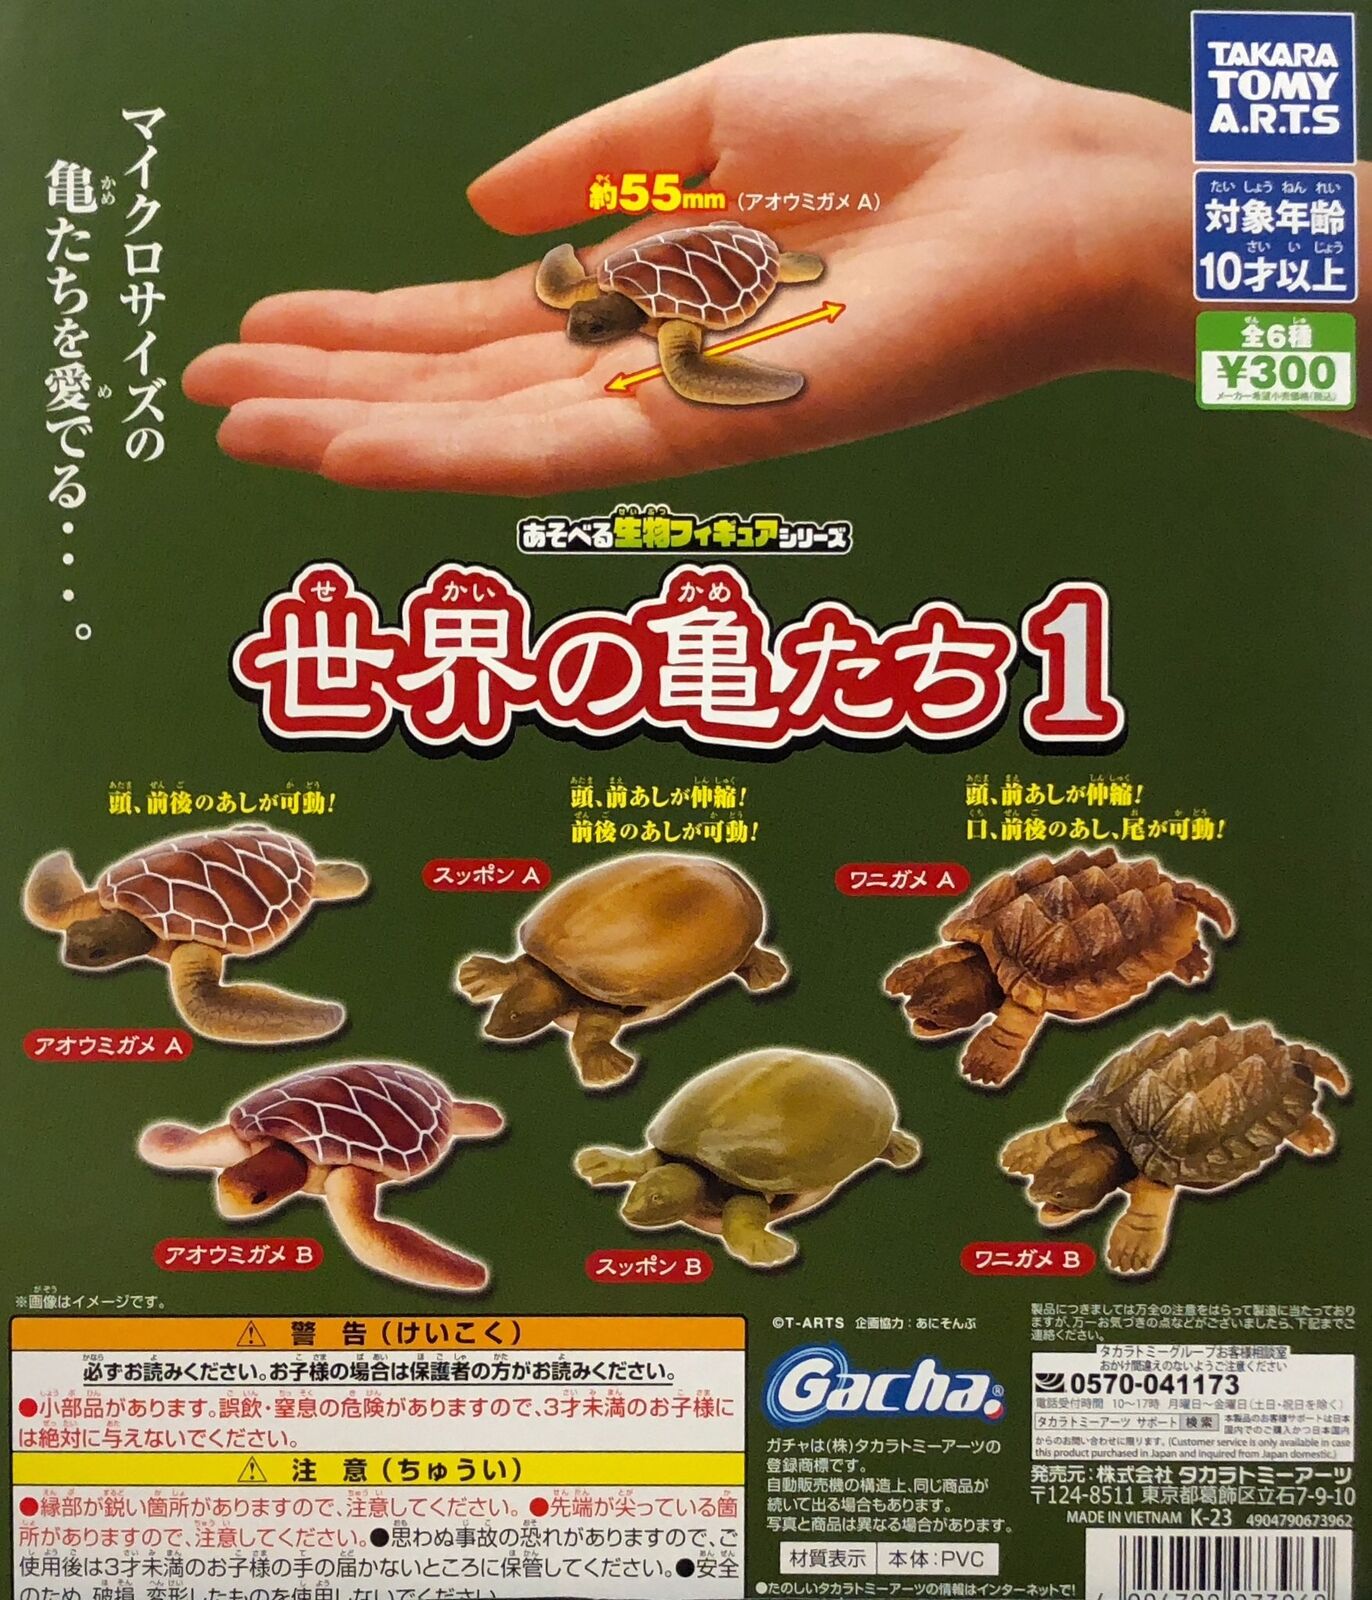 Playable Creature Figure Series Turtles of the World 1 All 6 Types Gacha 1220Y